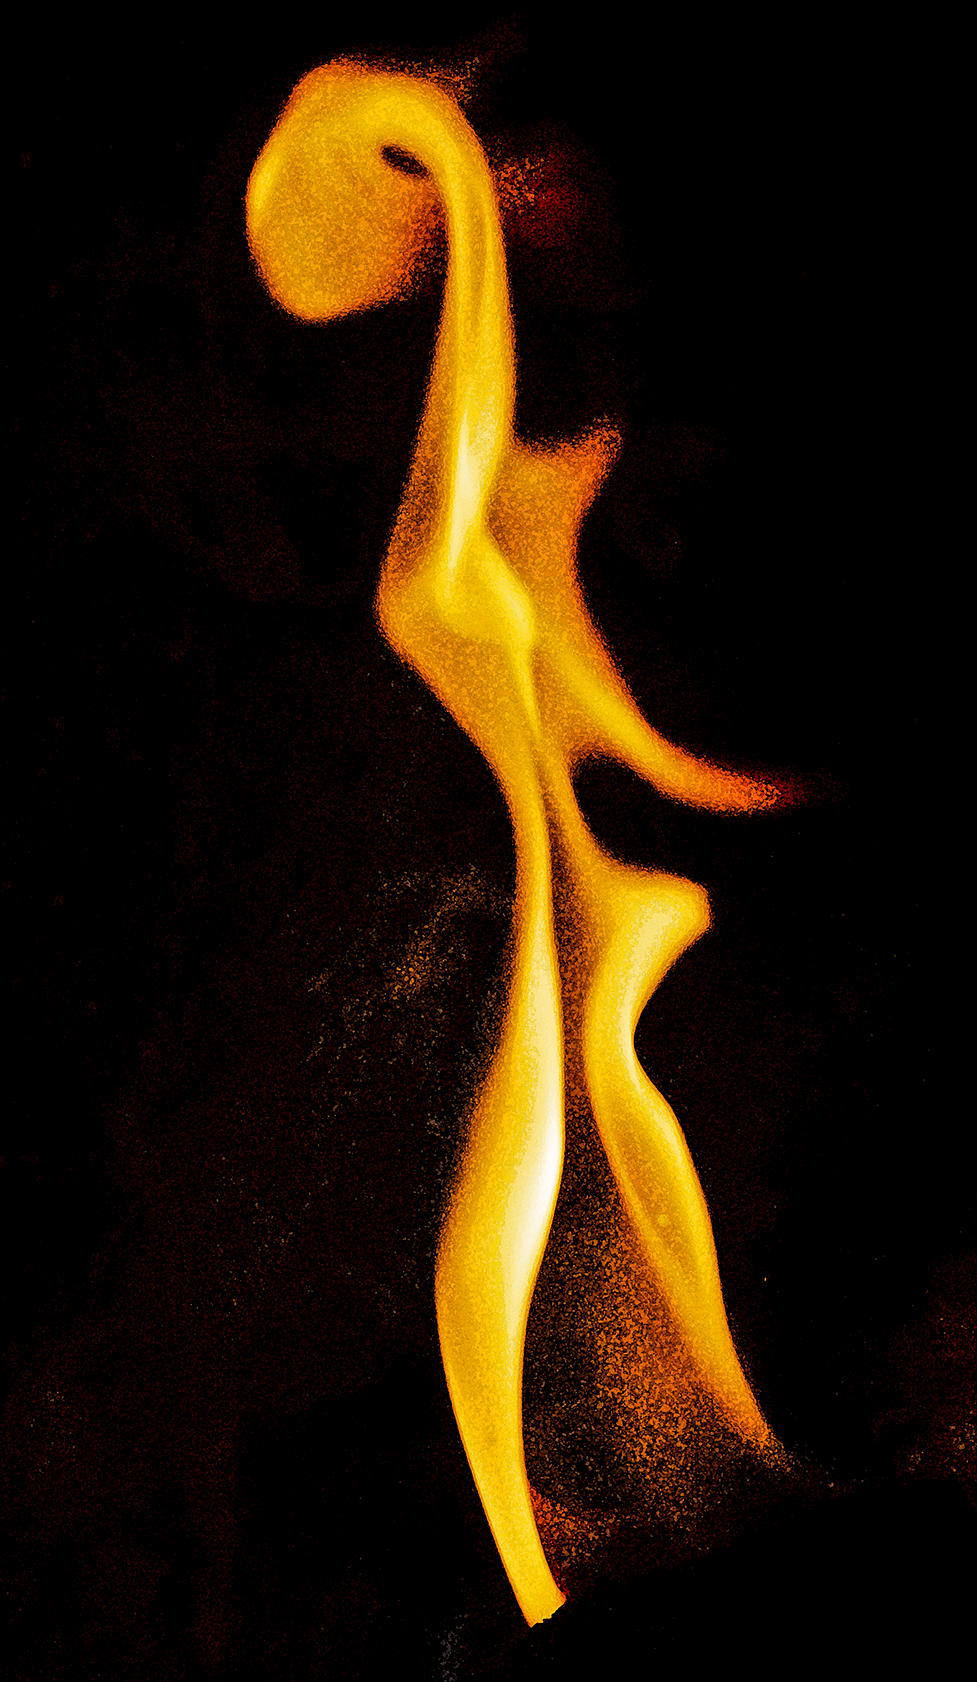 Dancing Flame No. 1 on 2 March 2022